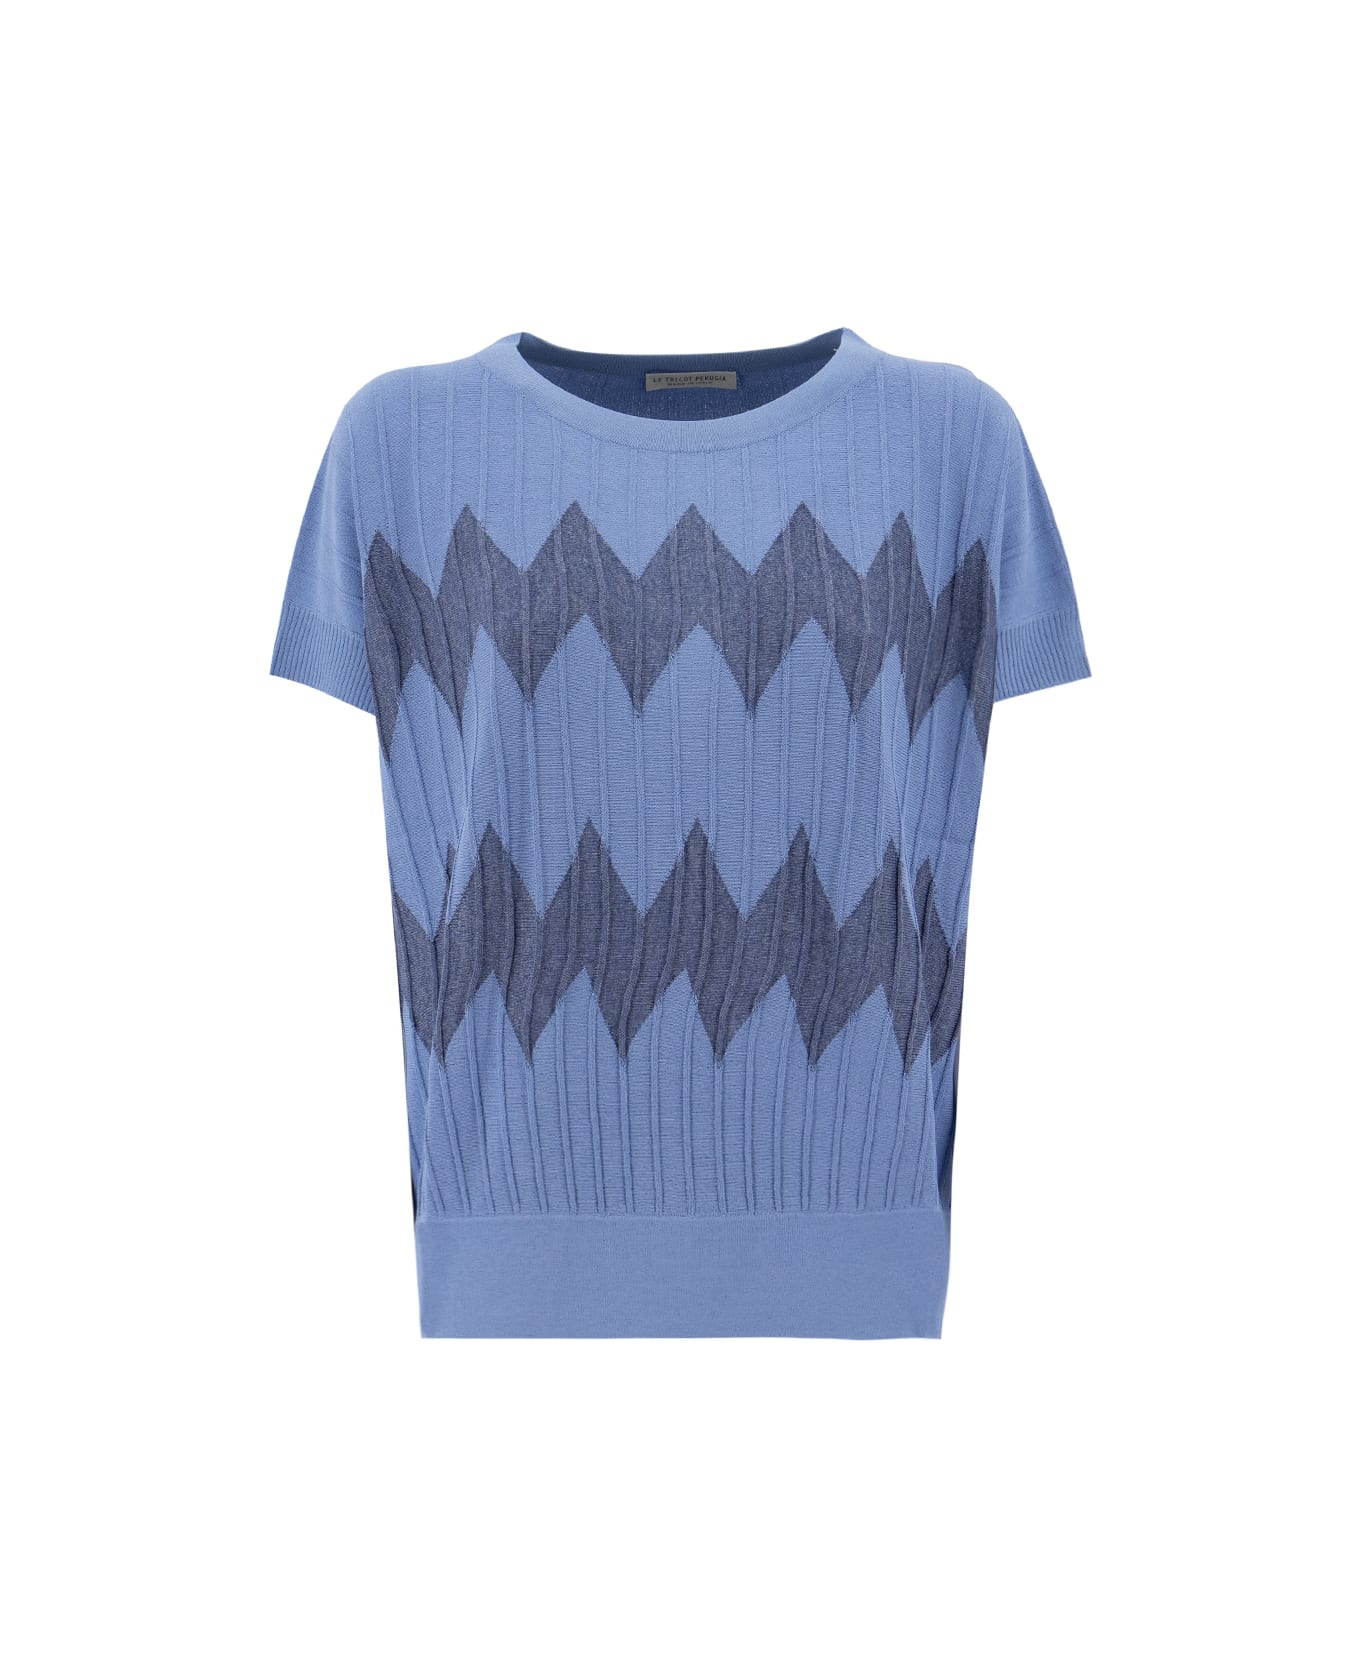 Le Tricot Perugia Sweater - BLUE JEANS ニットウェア